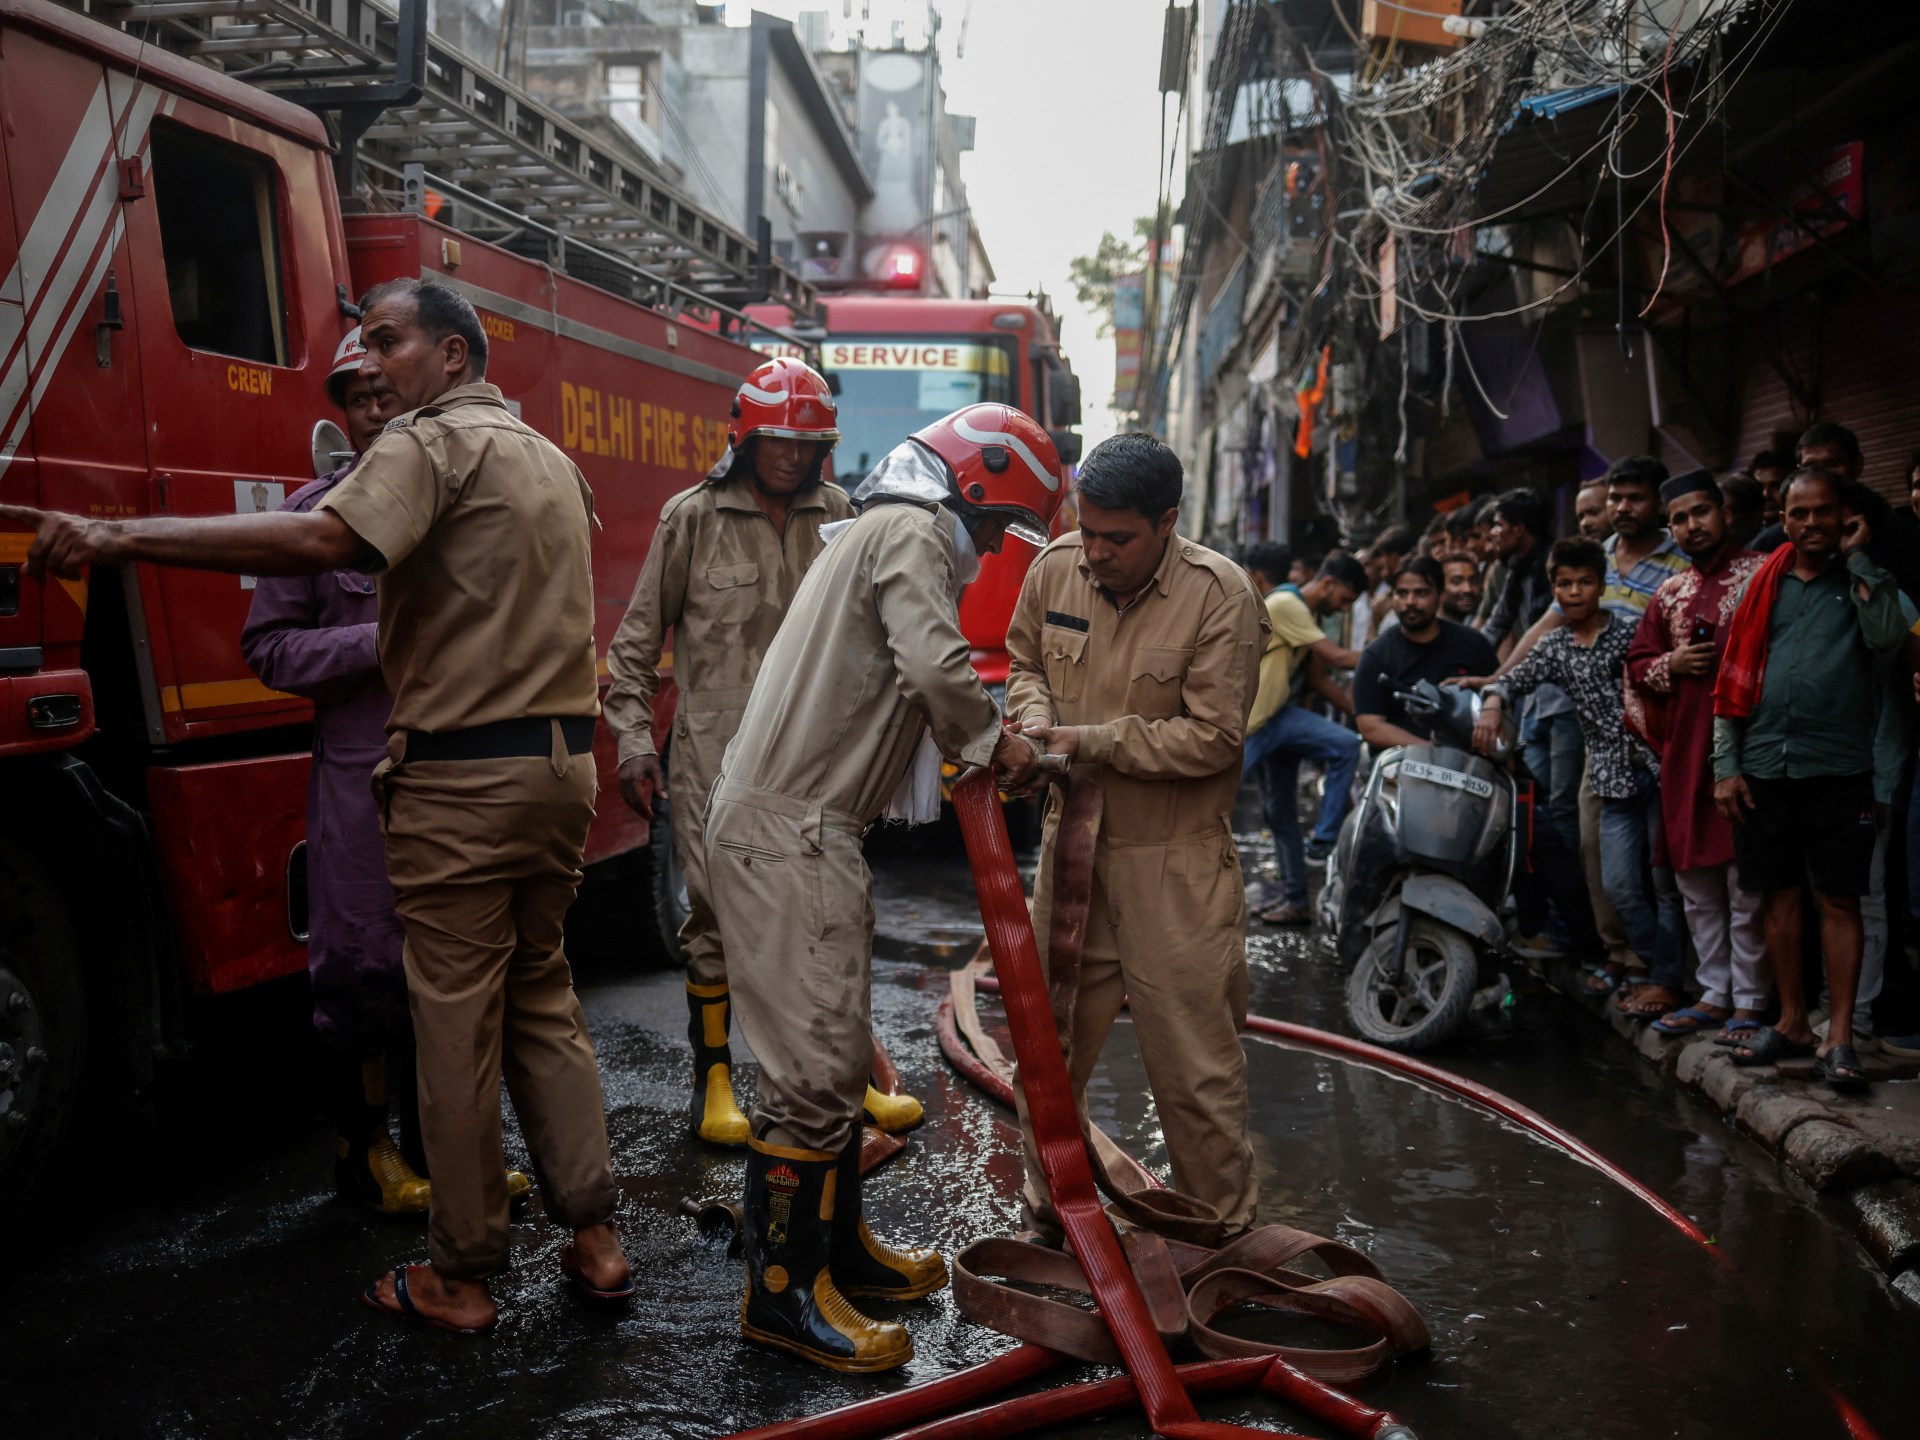 Record heat, surging blazes push Delhi’s firefighters to the brink | Climate